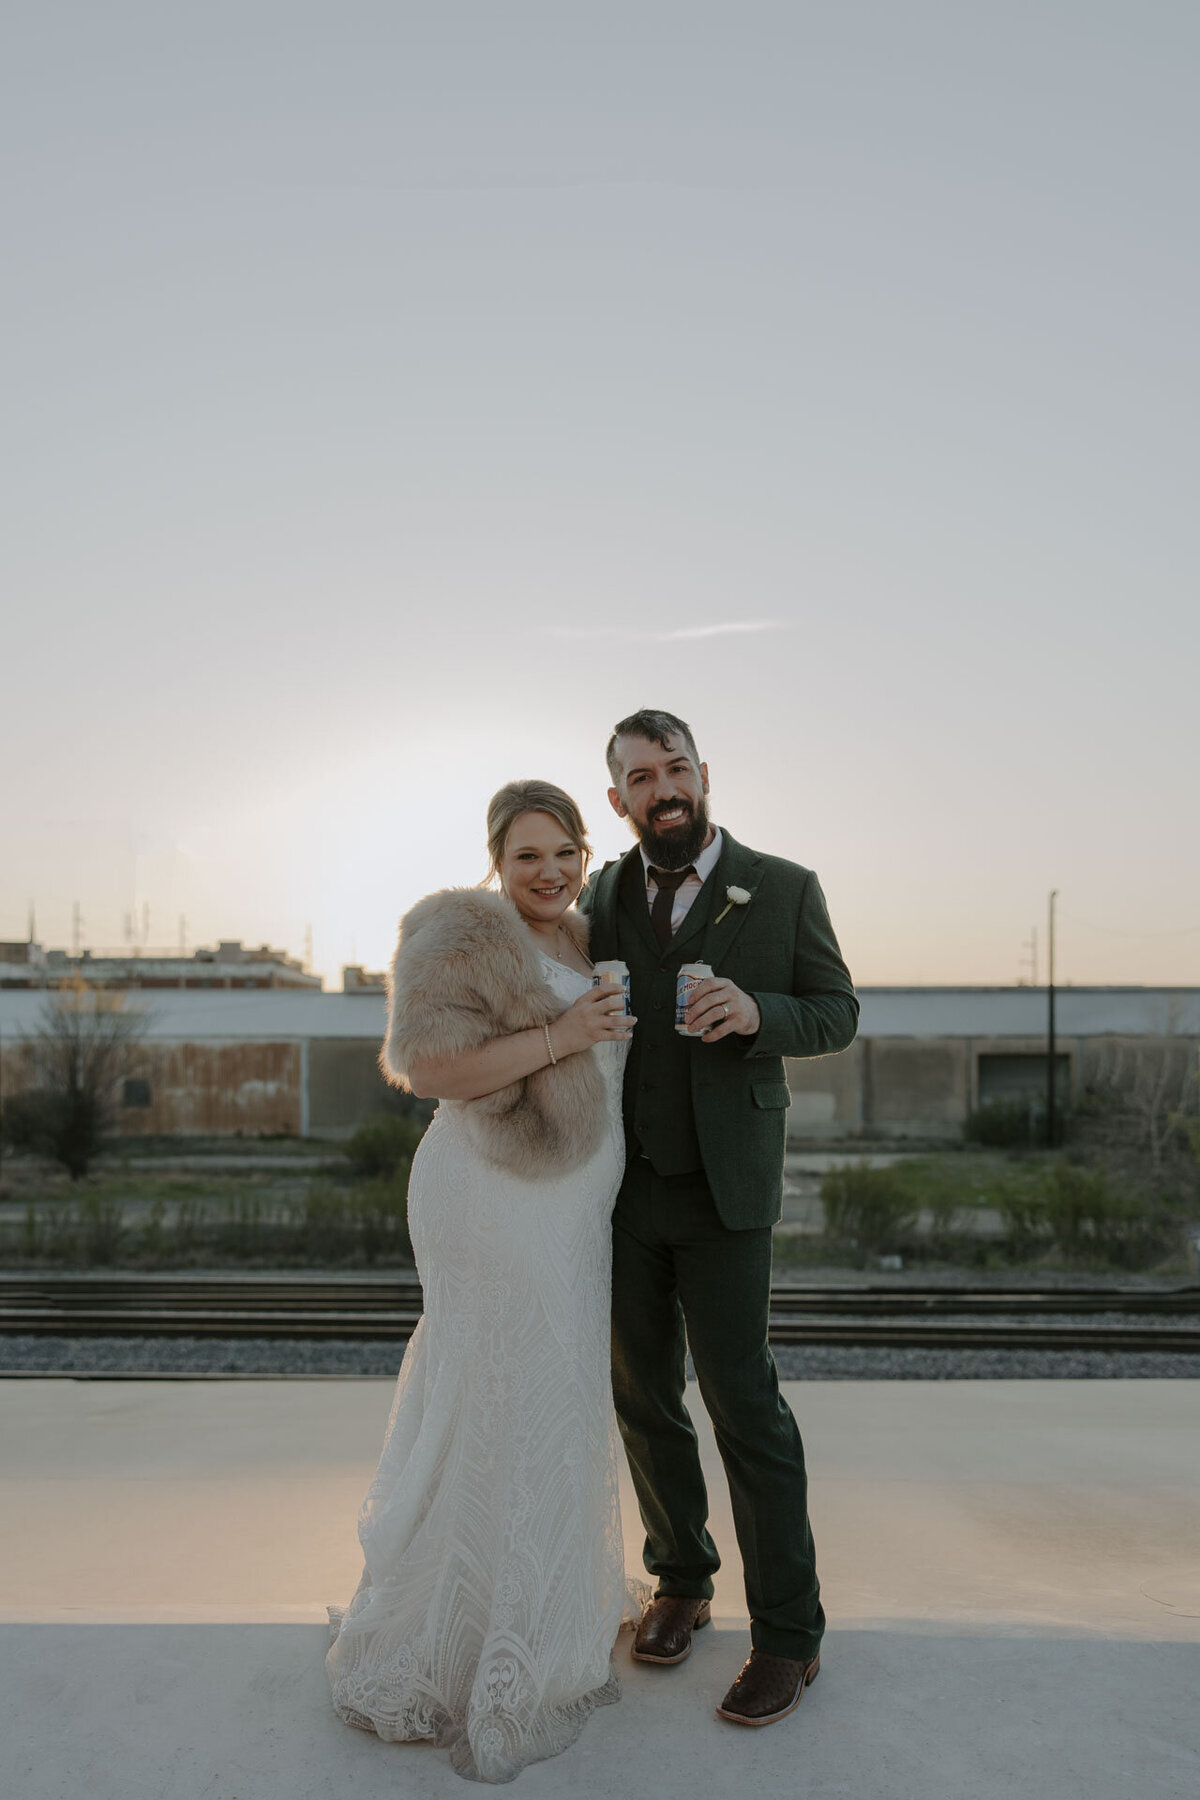 earth-to-madison-dallas-wedding-photographer-for-unique-couples98